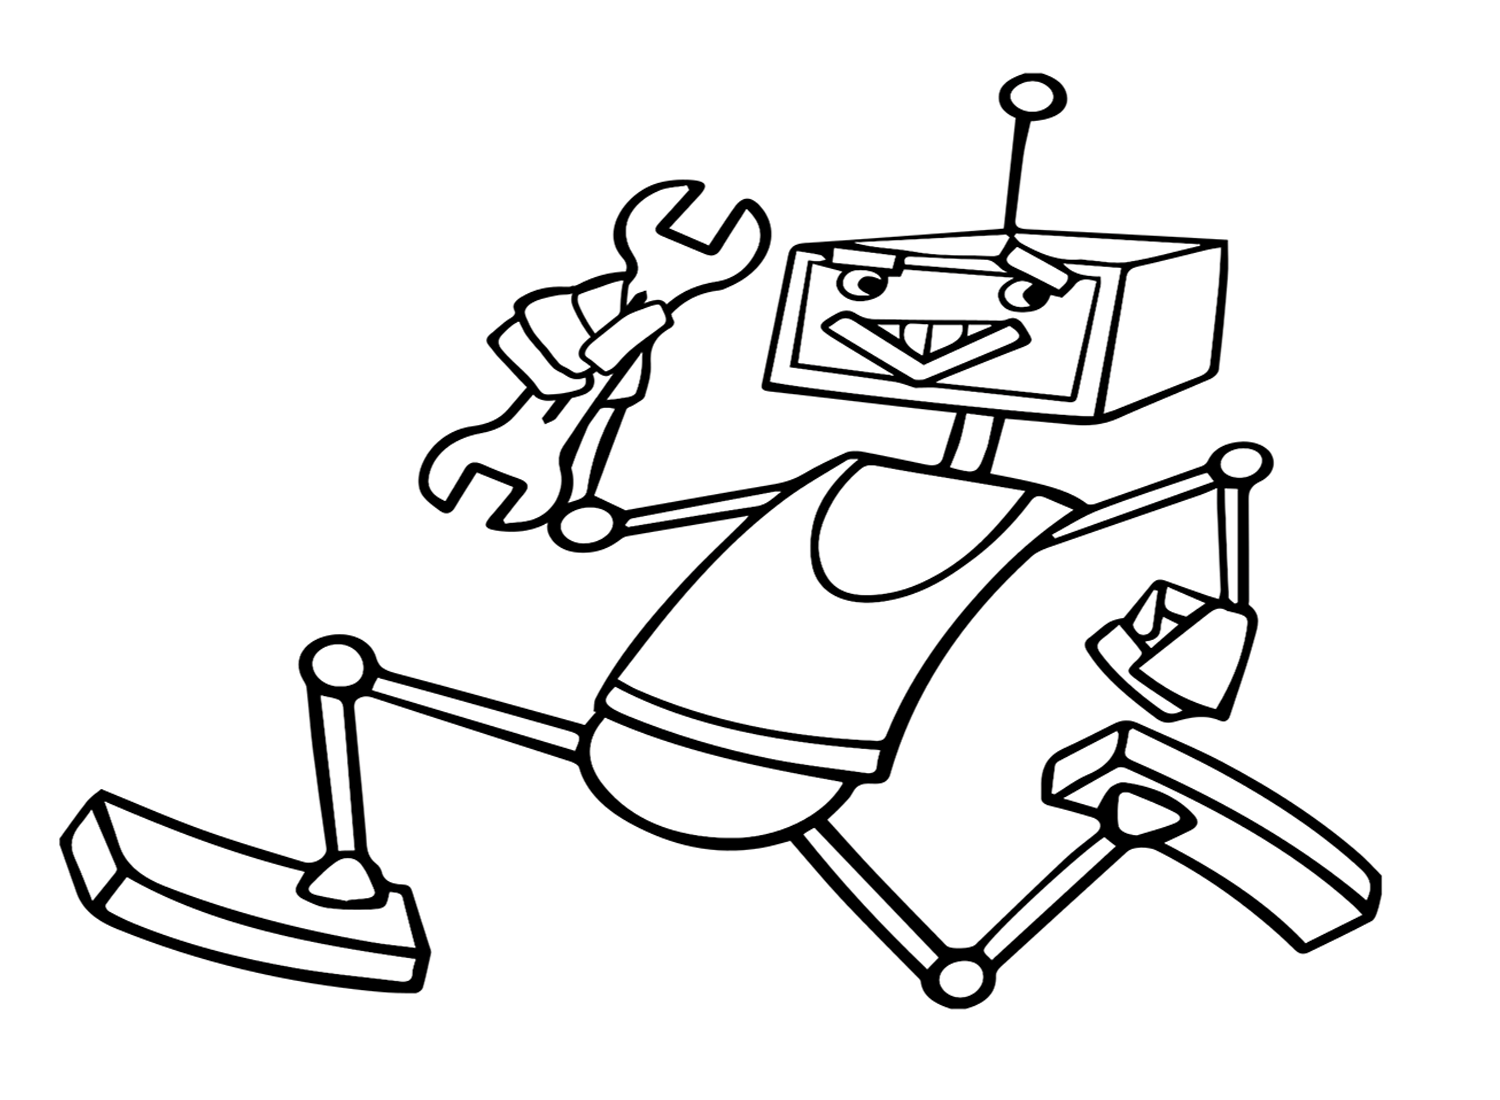 Robot with Wrench Coloring Page